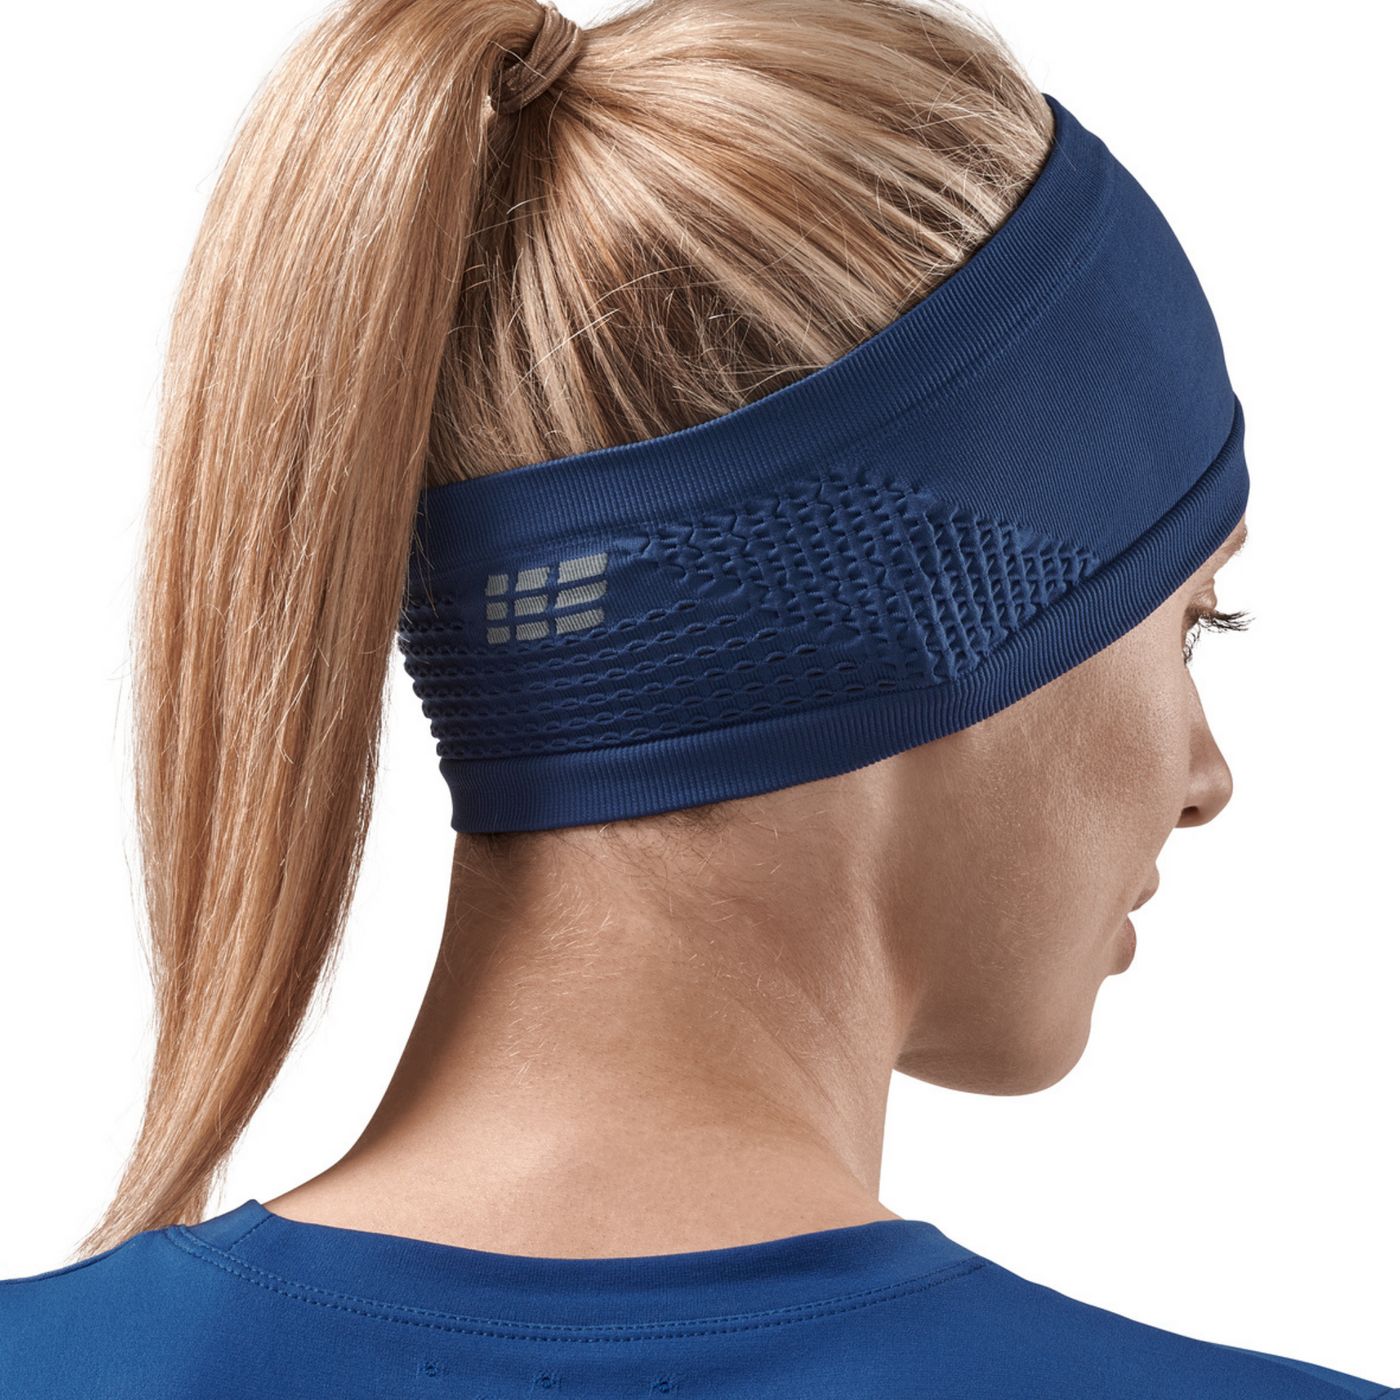 Cold Weather Headband, Blue, Back View Female Model